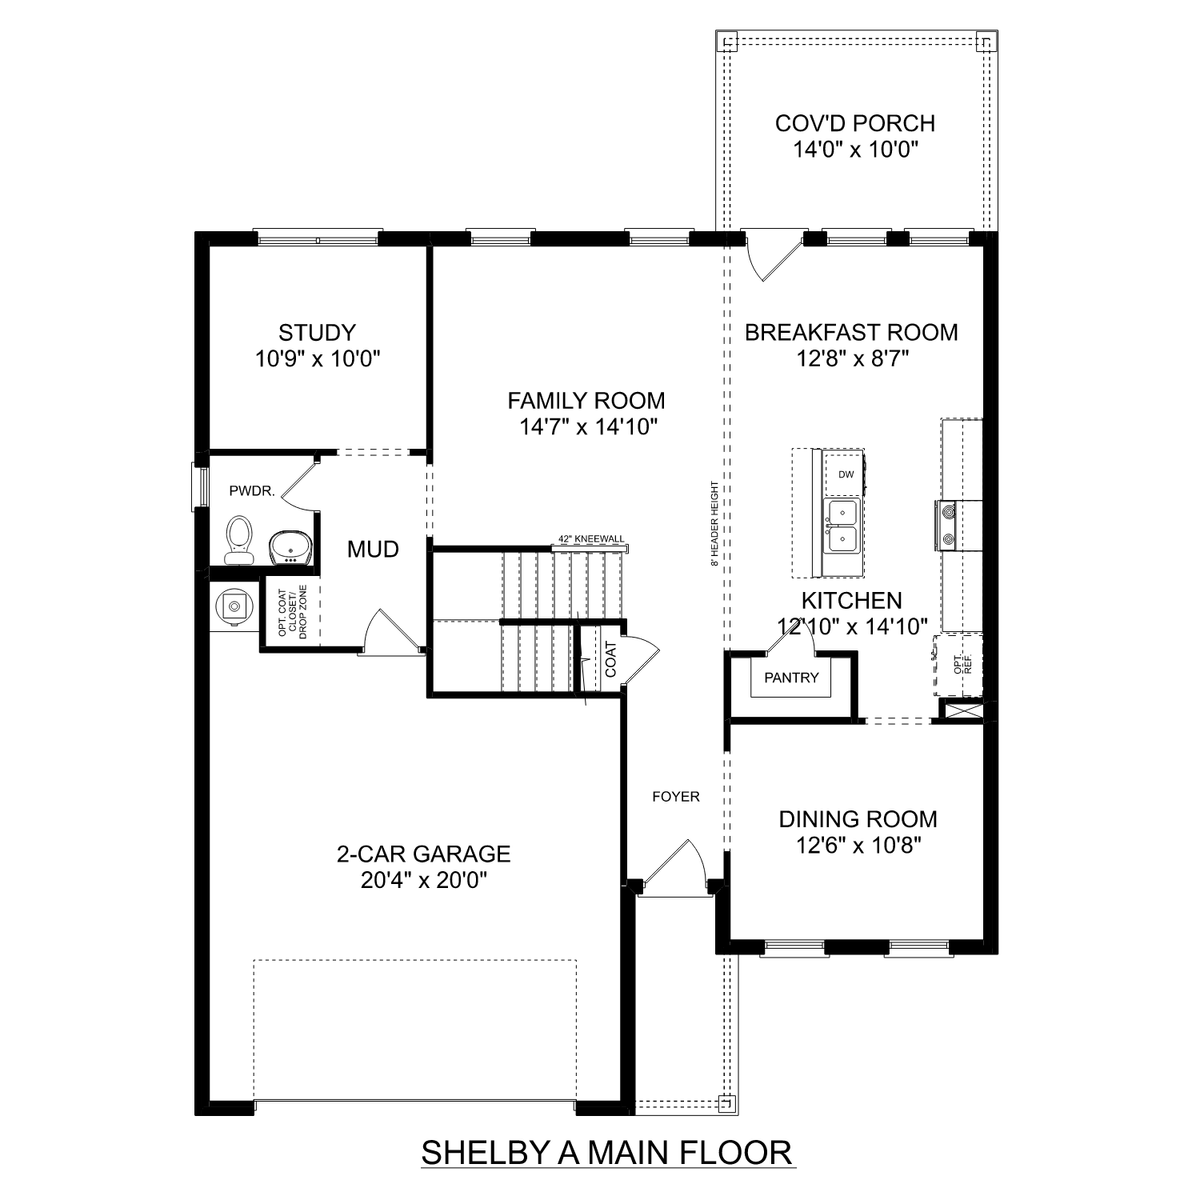 1 - The Shelby A buildable floor plan layout in Davidson Homes' Cain Park community.